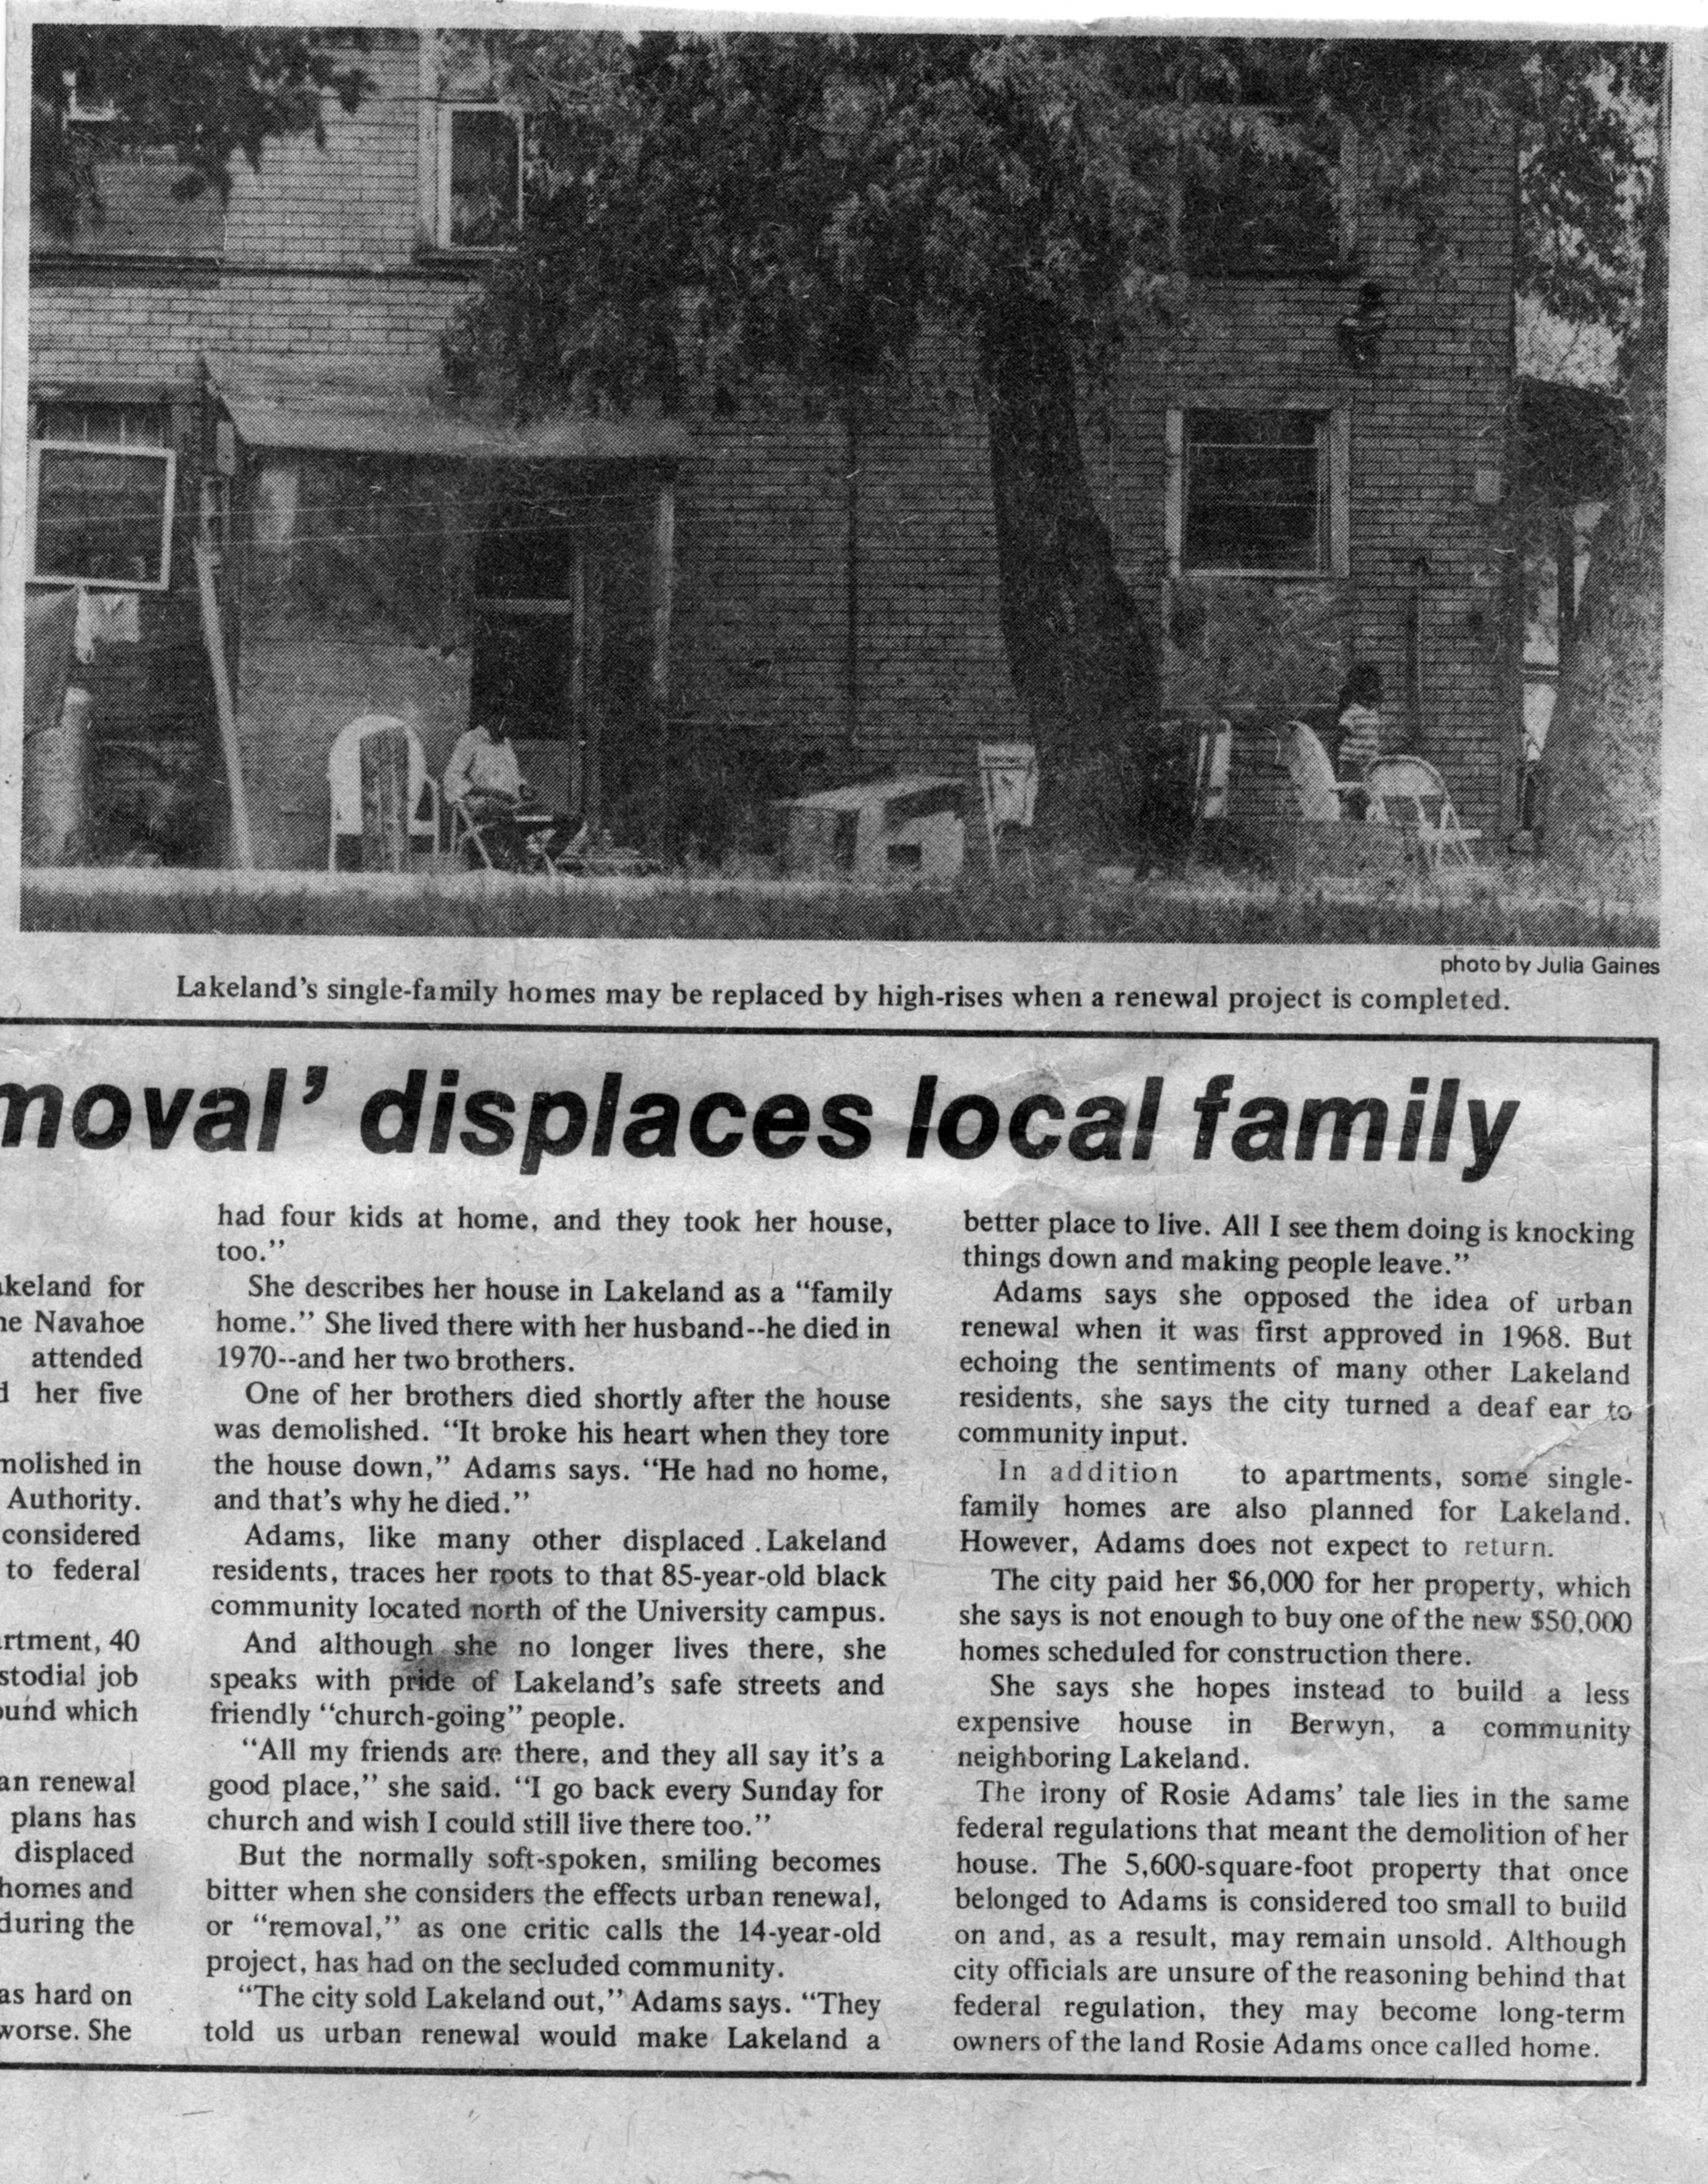 Removal’ displaces local family